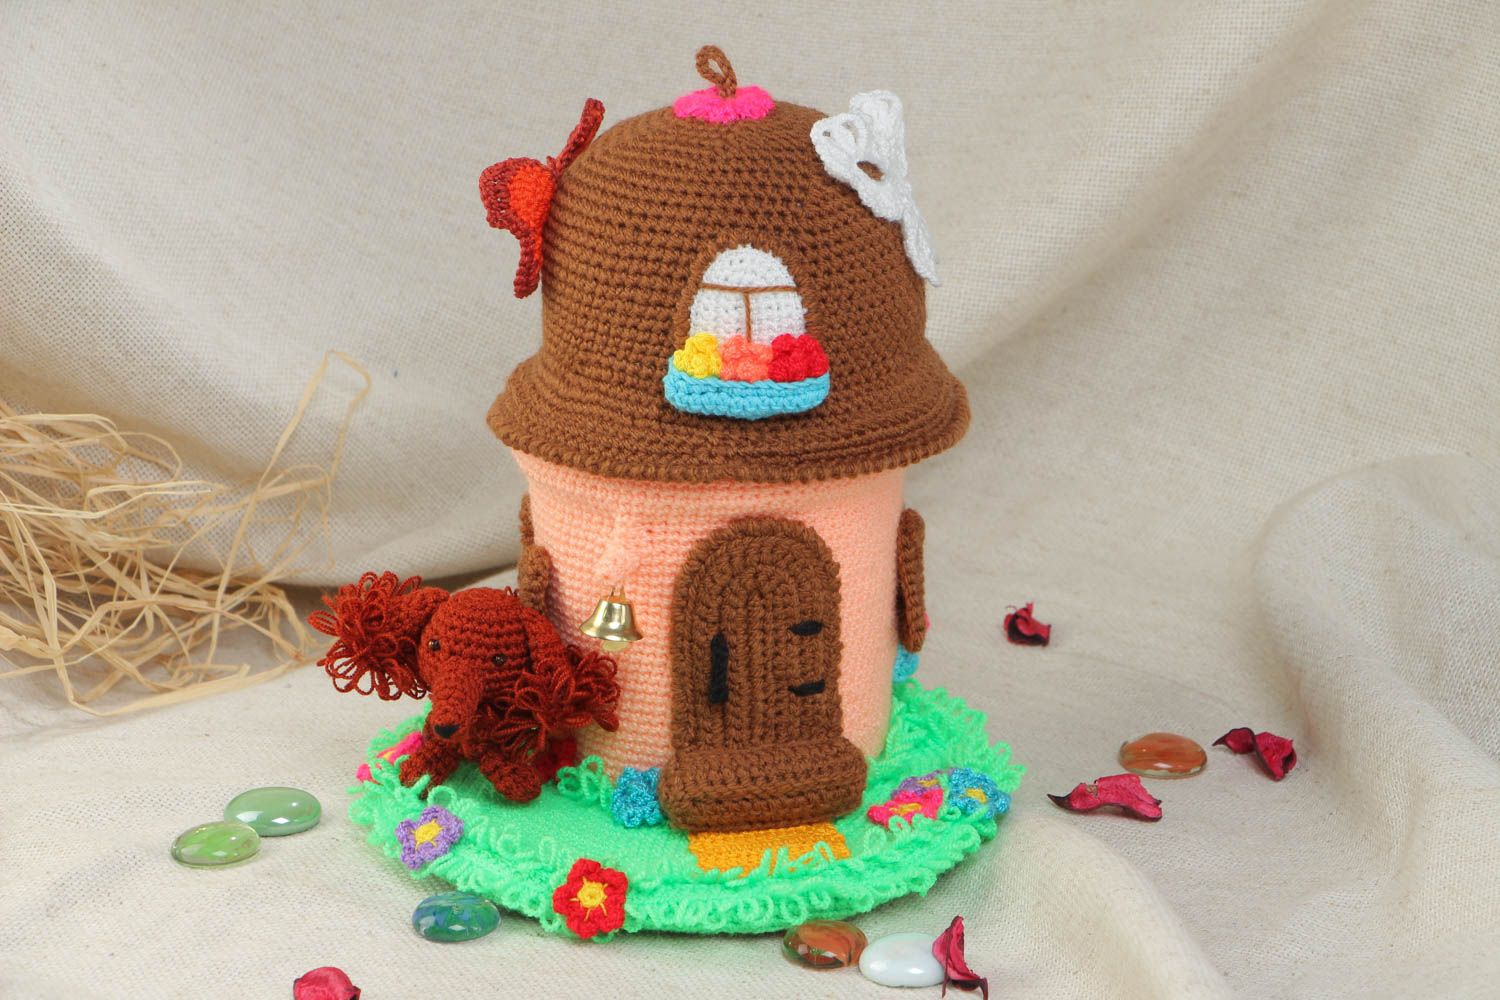 Handmade crocheted toy box in the form of small colorful house home decor photo 1